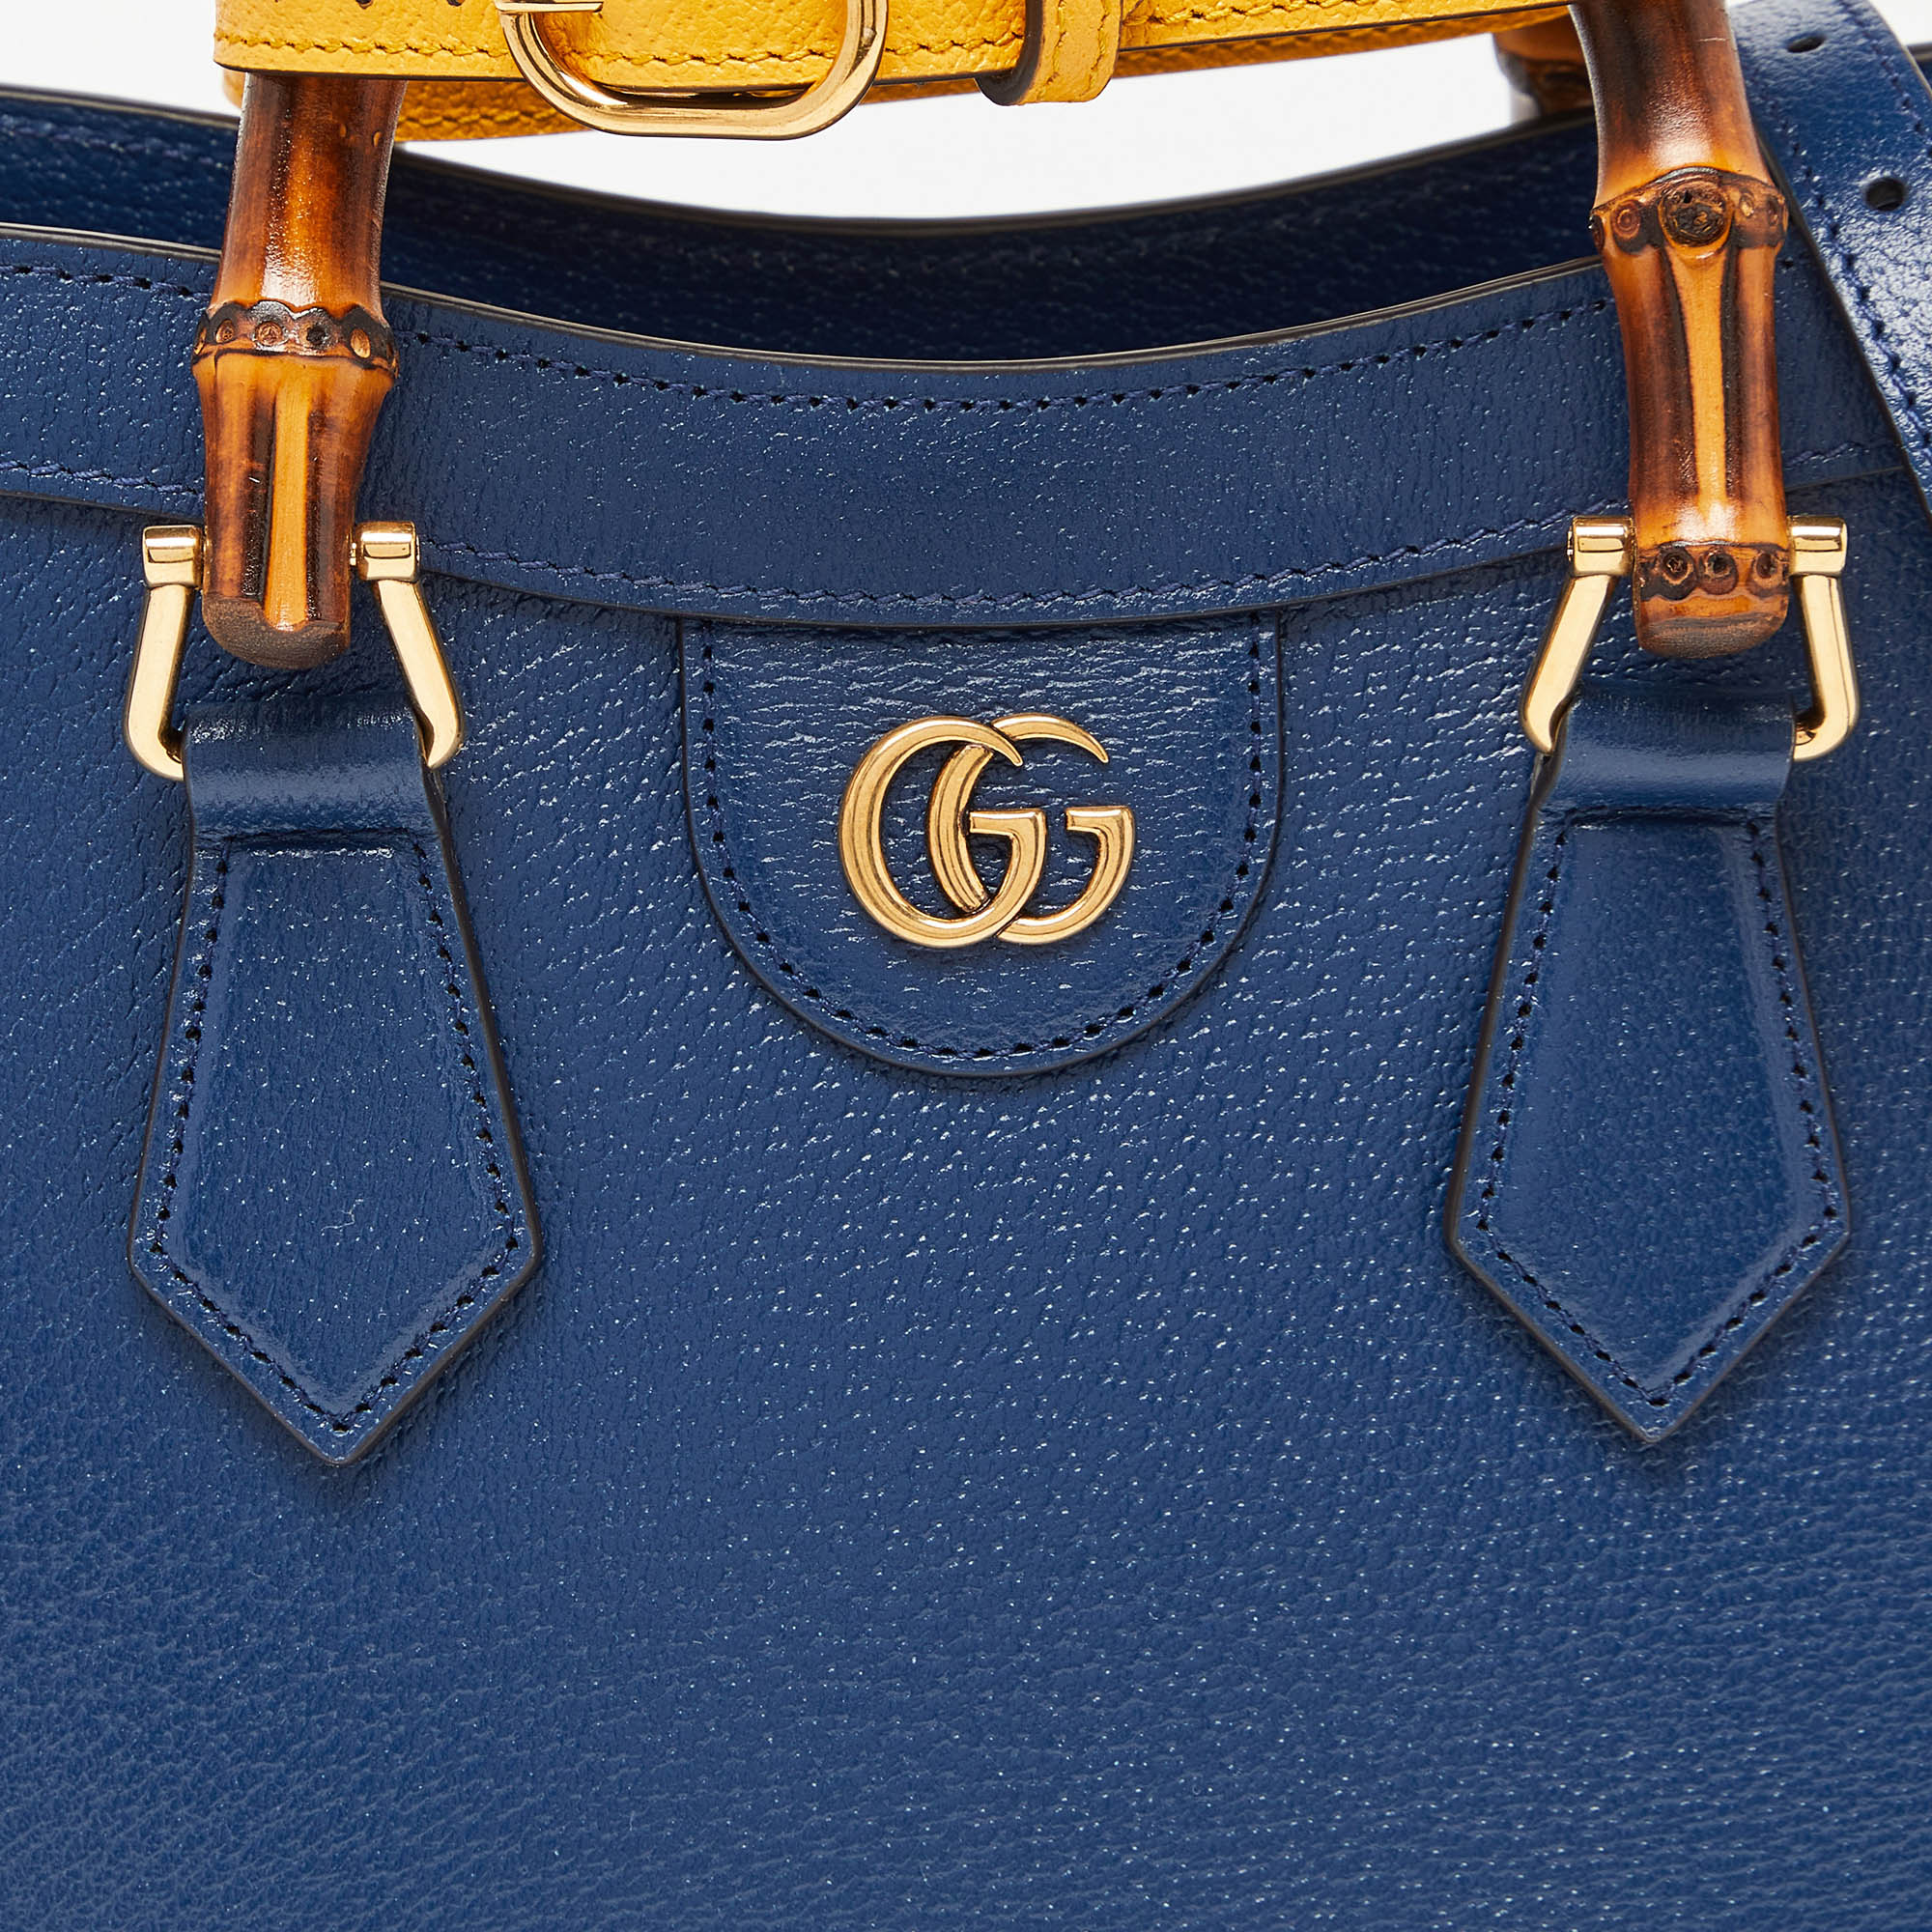 Gucci Navy Blue Leather Small Diana Tote